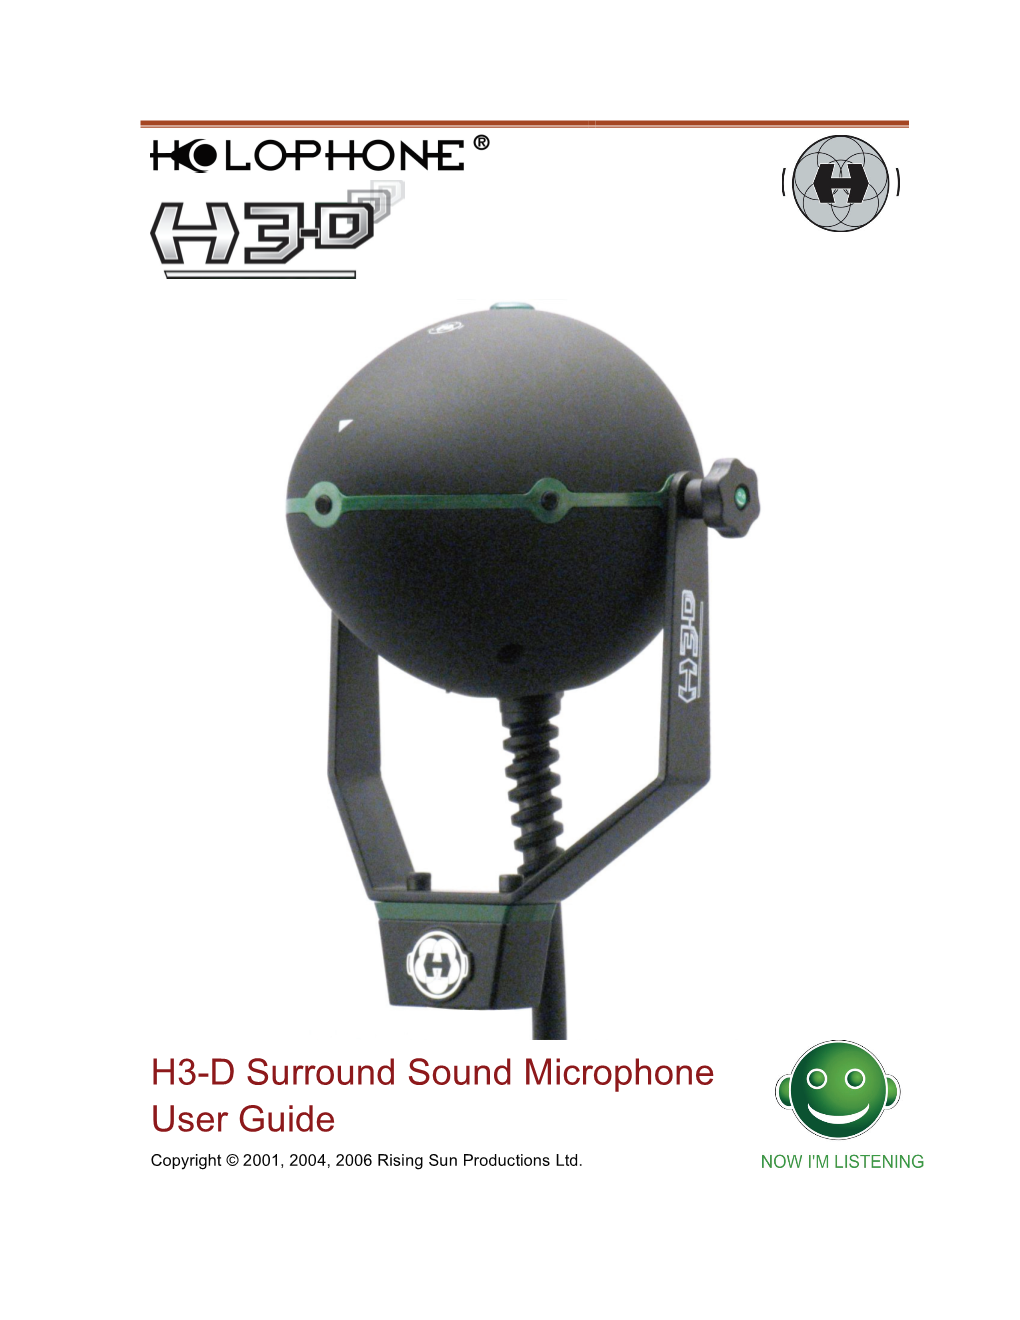 H3-D Surround Sound Microphone User Guide Copyright © 2001, 2004, 2006 Rising Sun Productions Ltd